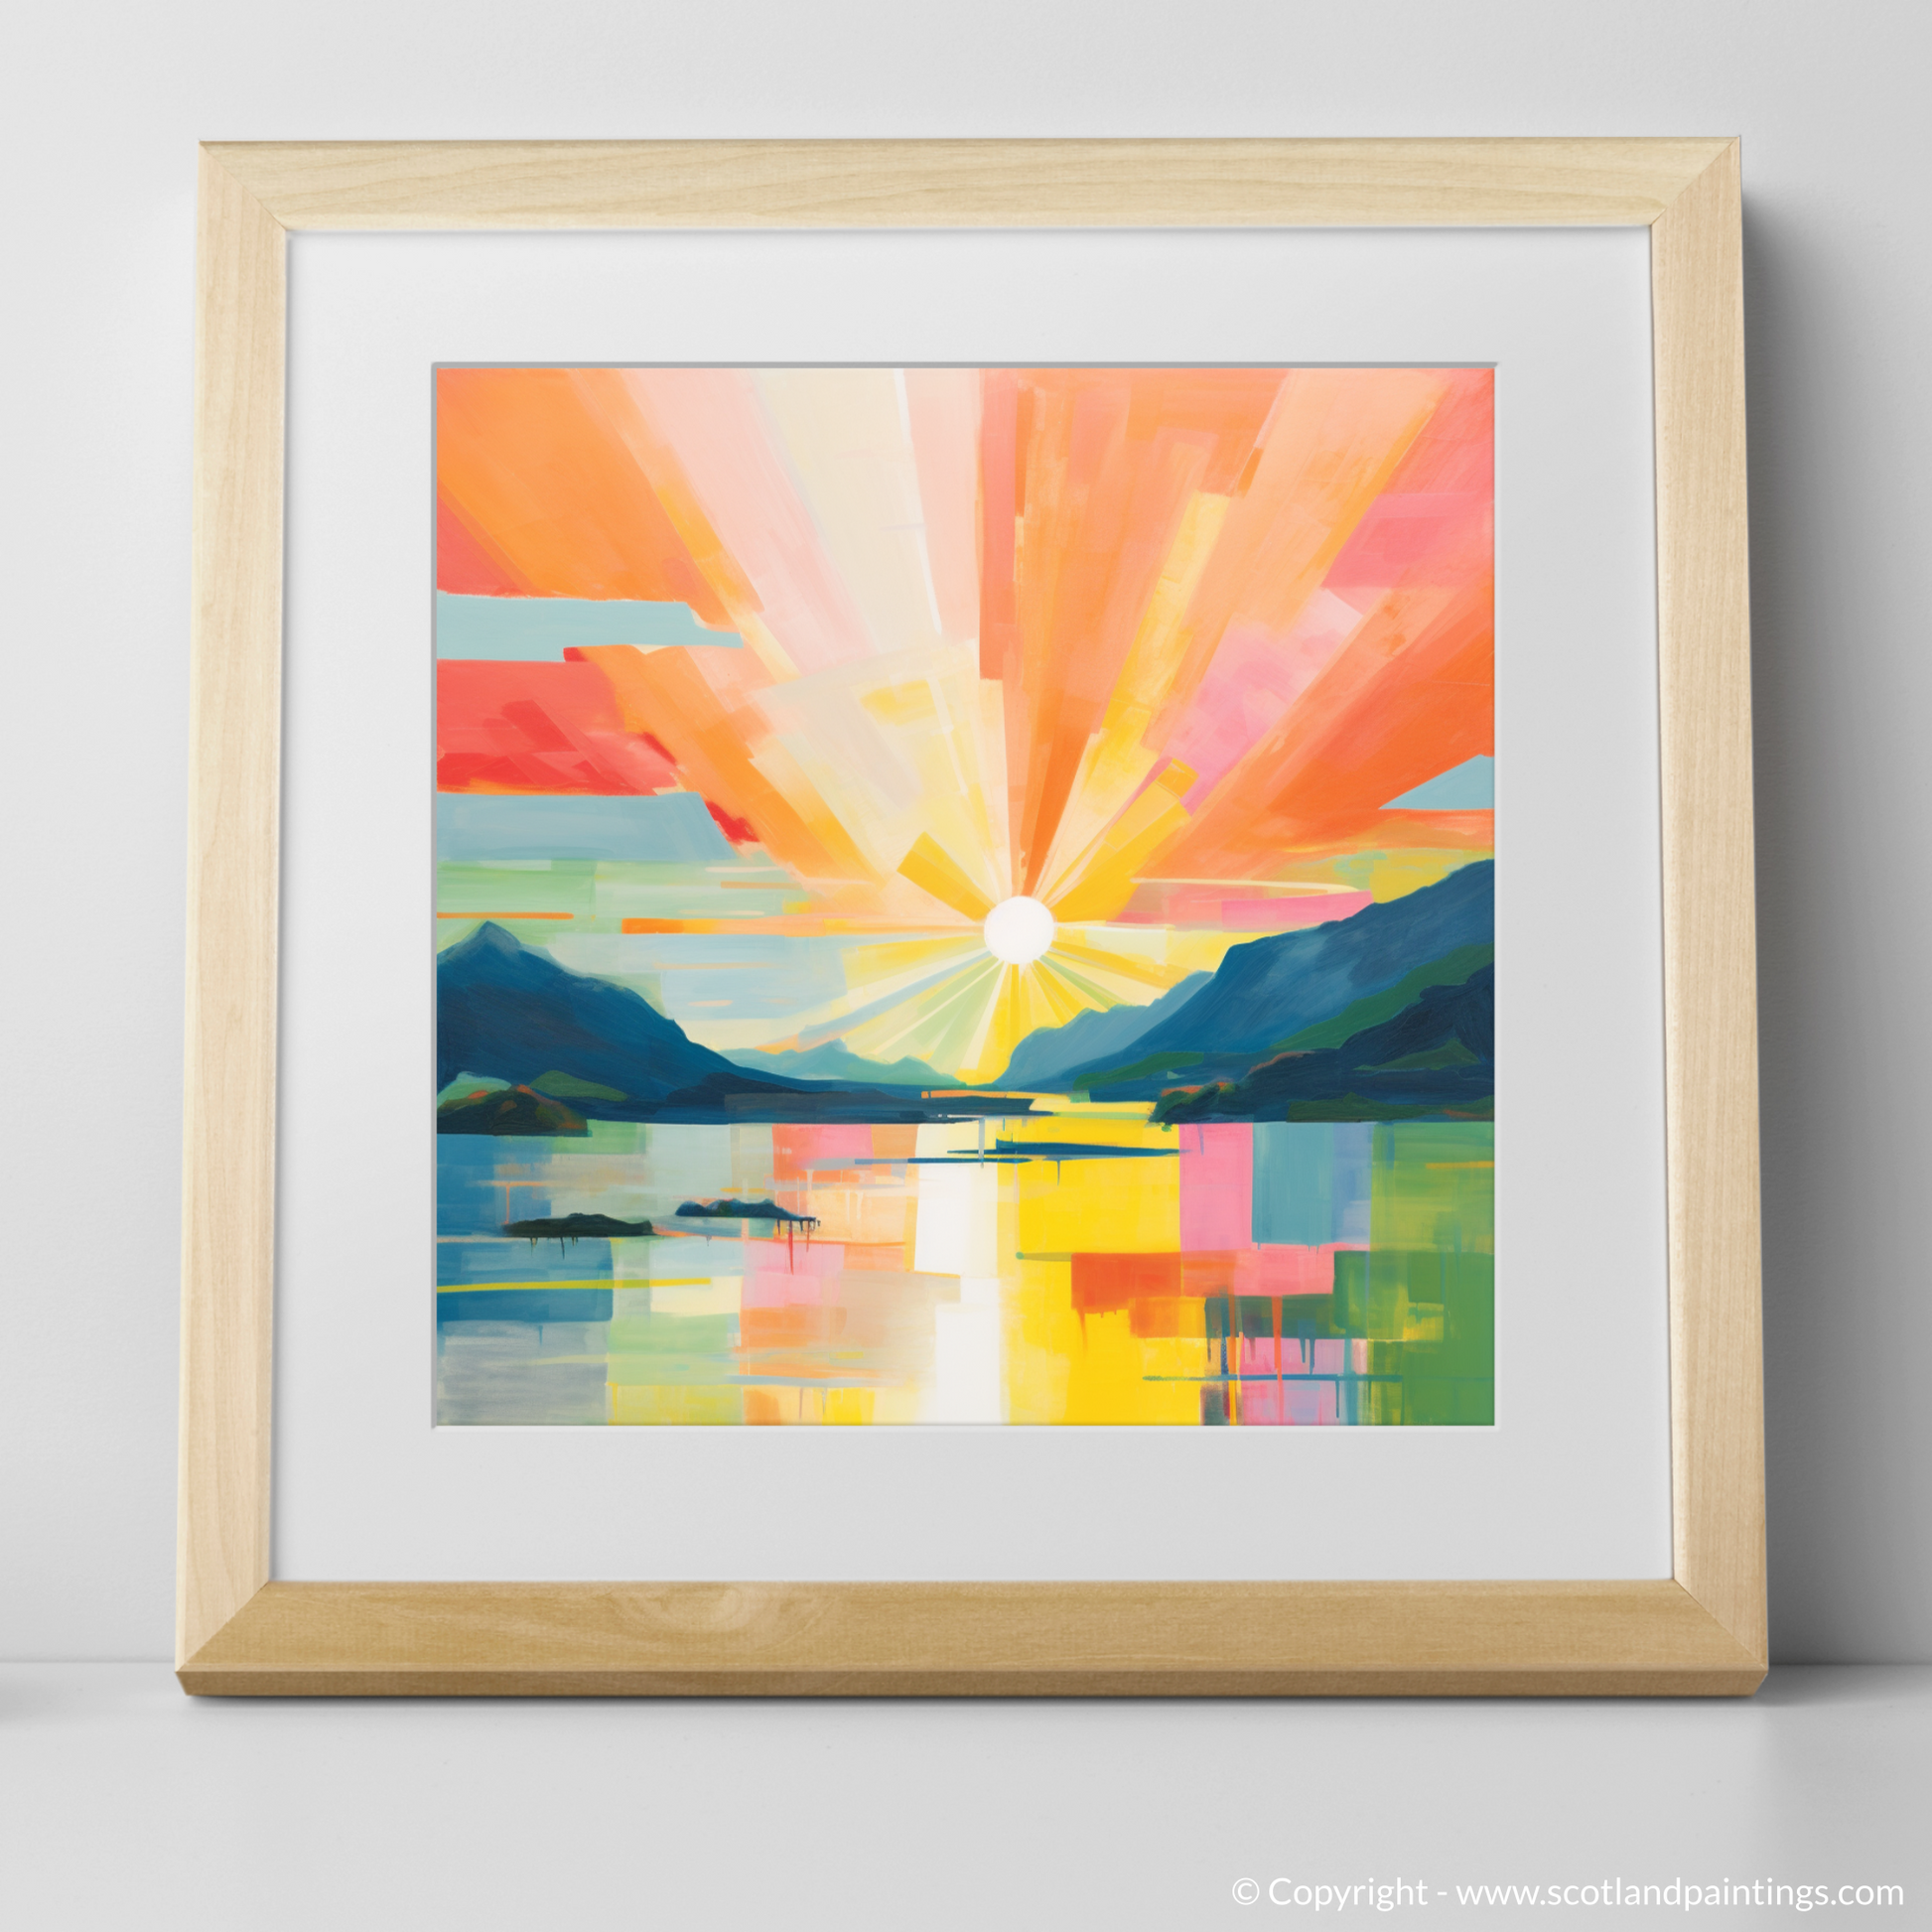 Art Print of Sunbeams on Loch Lomond with a natural frame